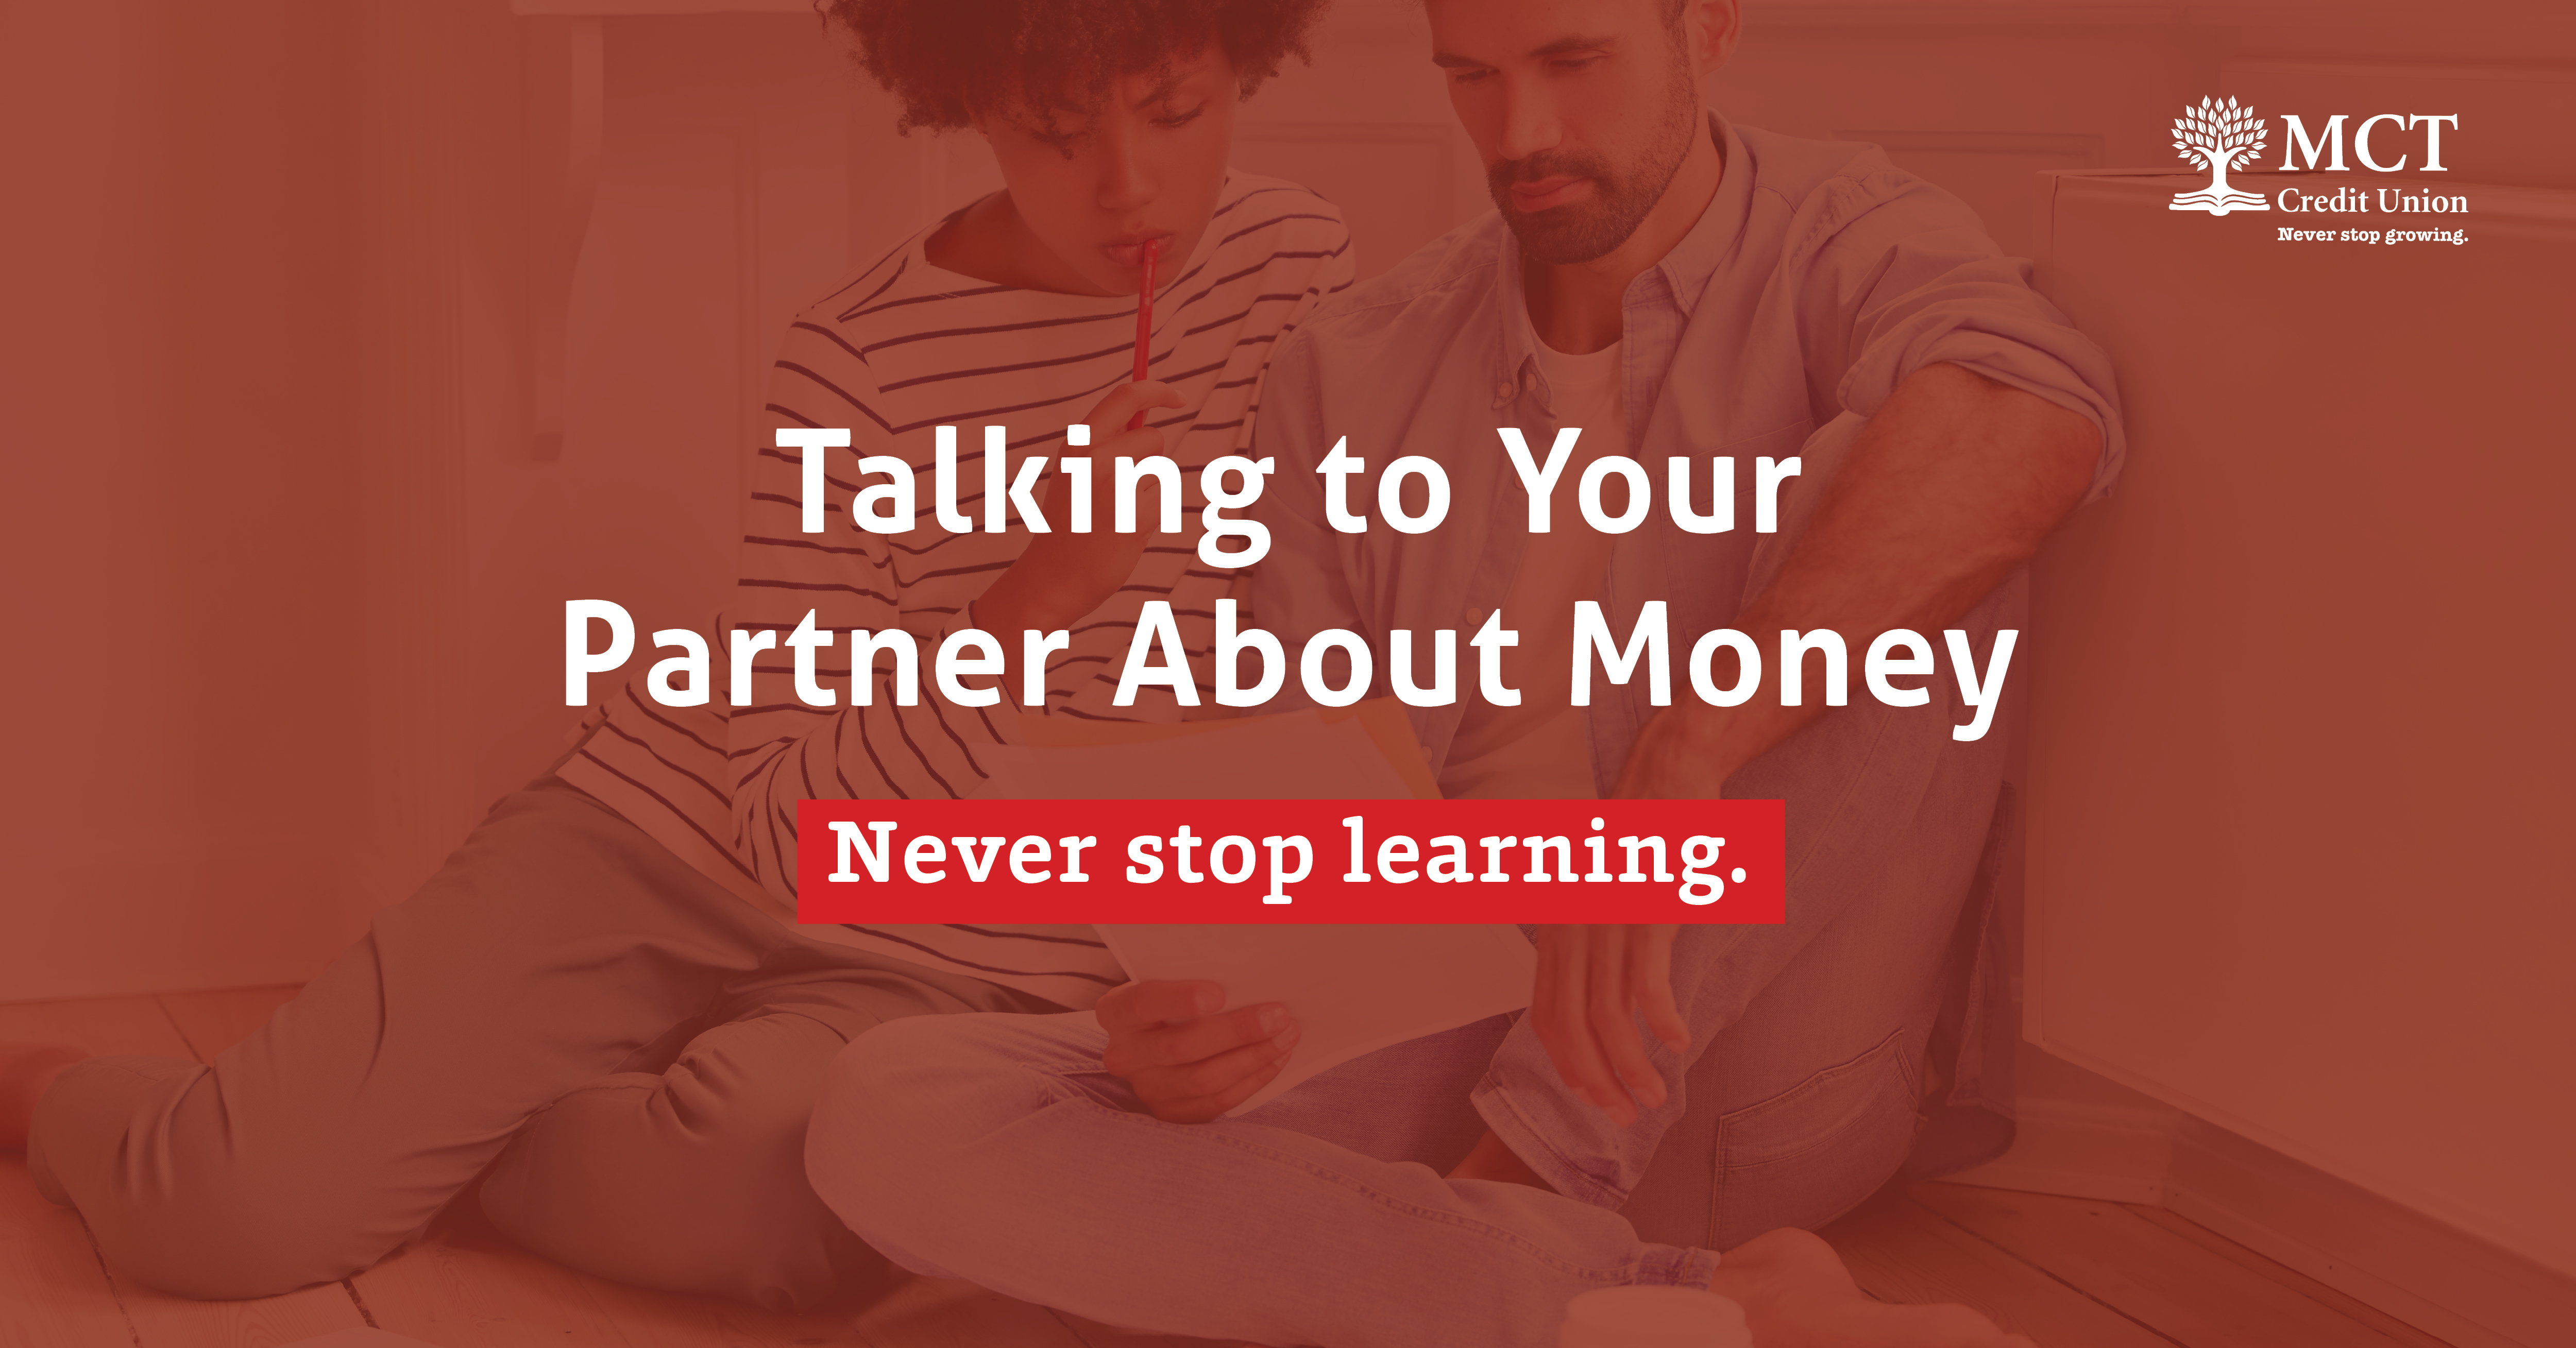 Talking to Your Partner About Money